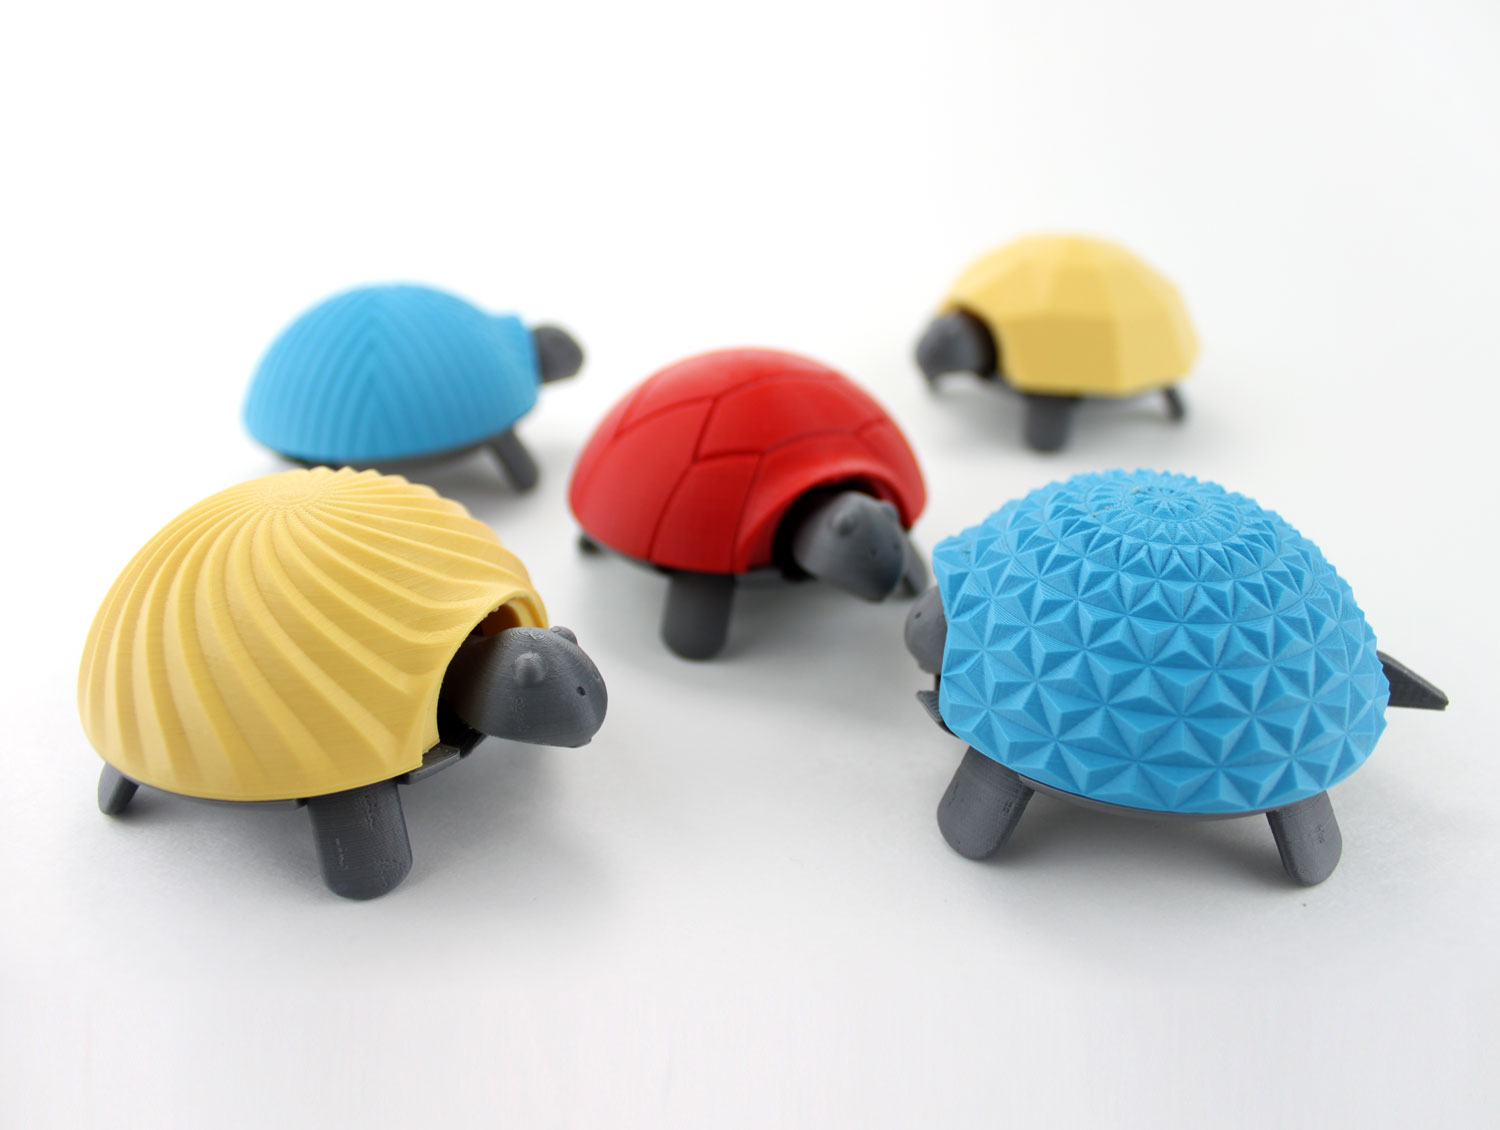 group patterns 3d printed squishy turtle nature animal toy kids project design colorful